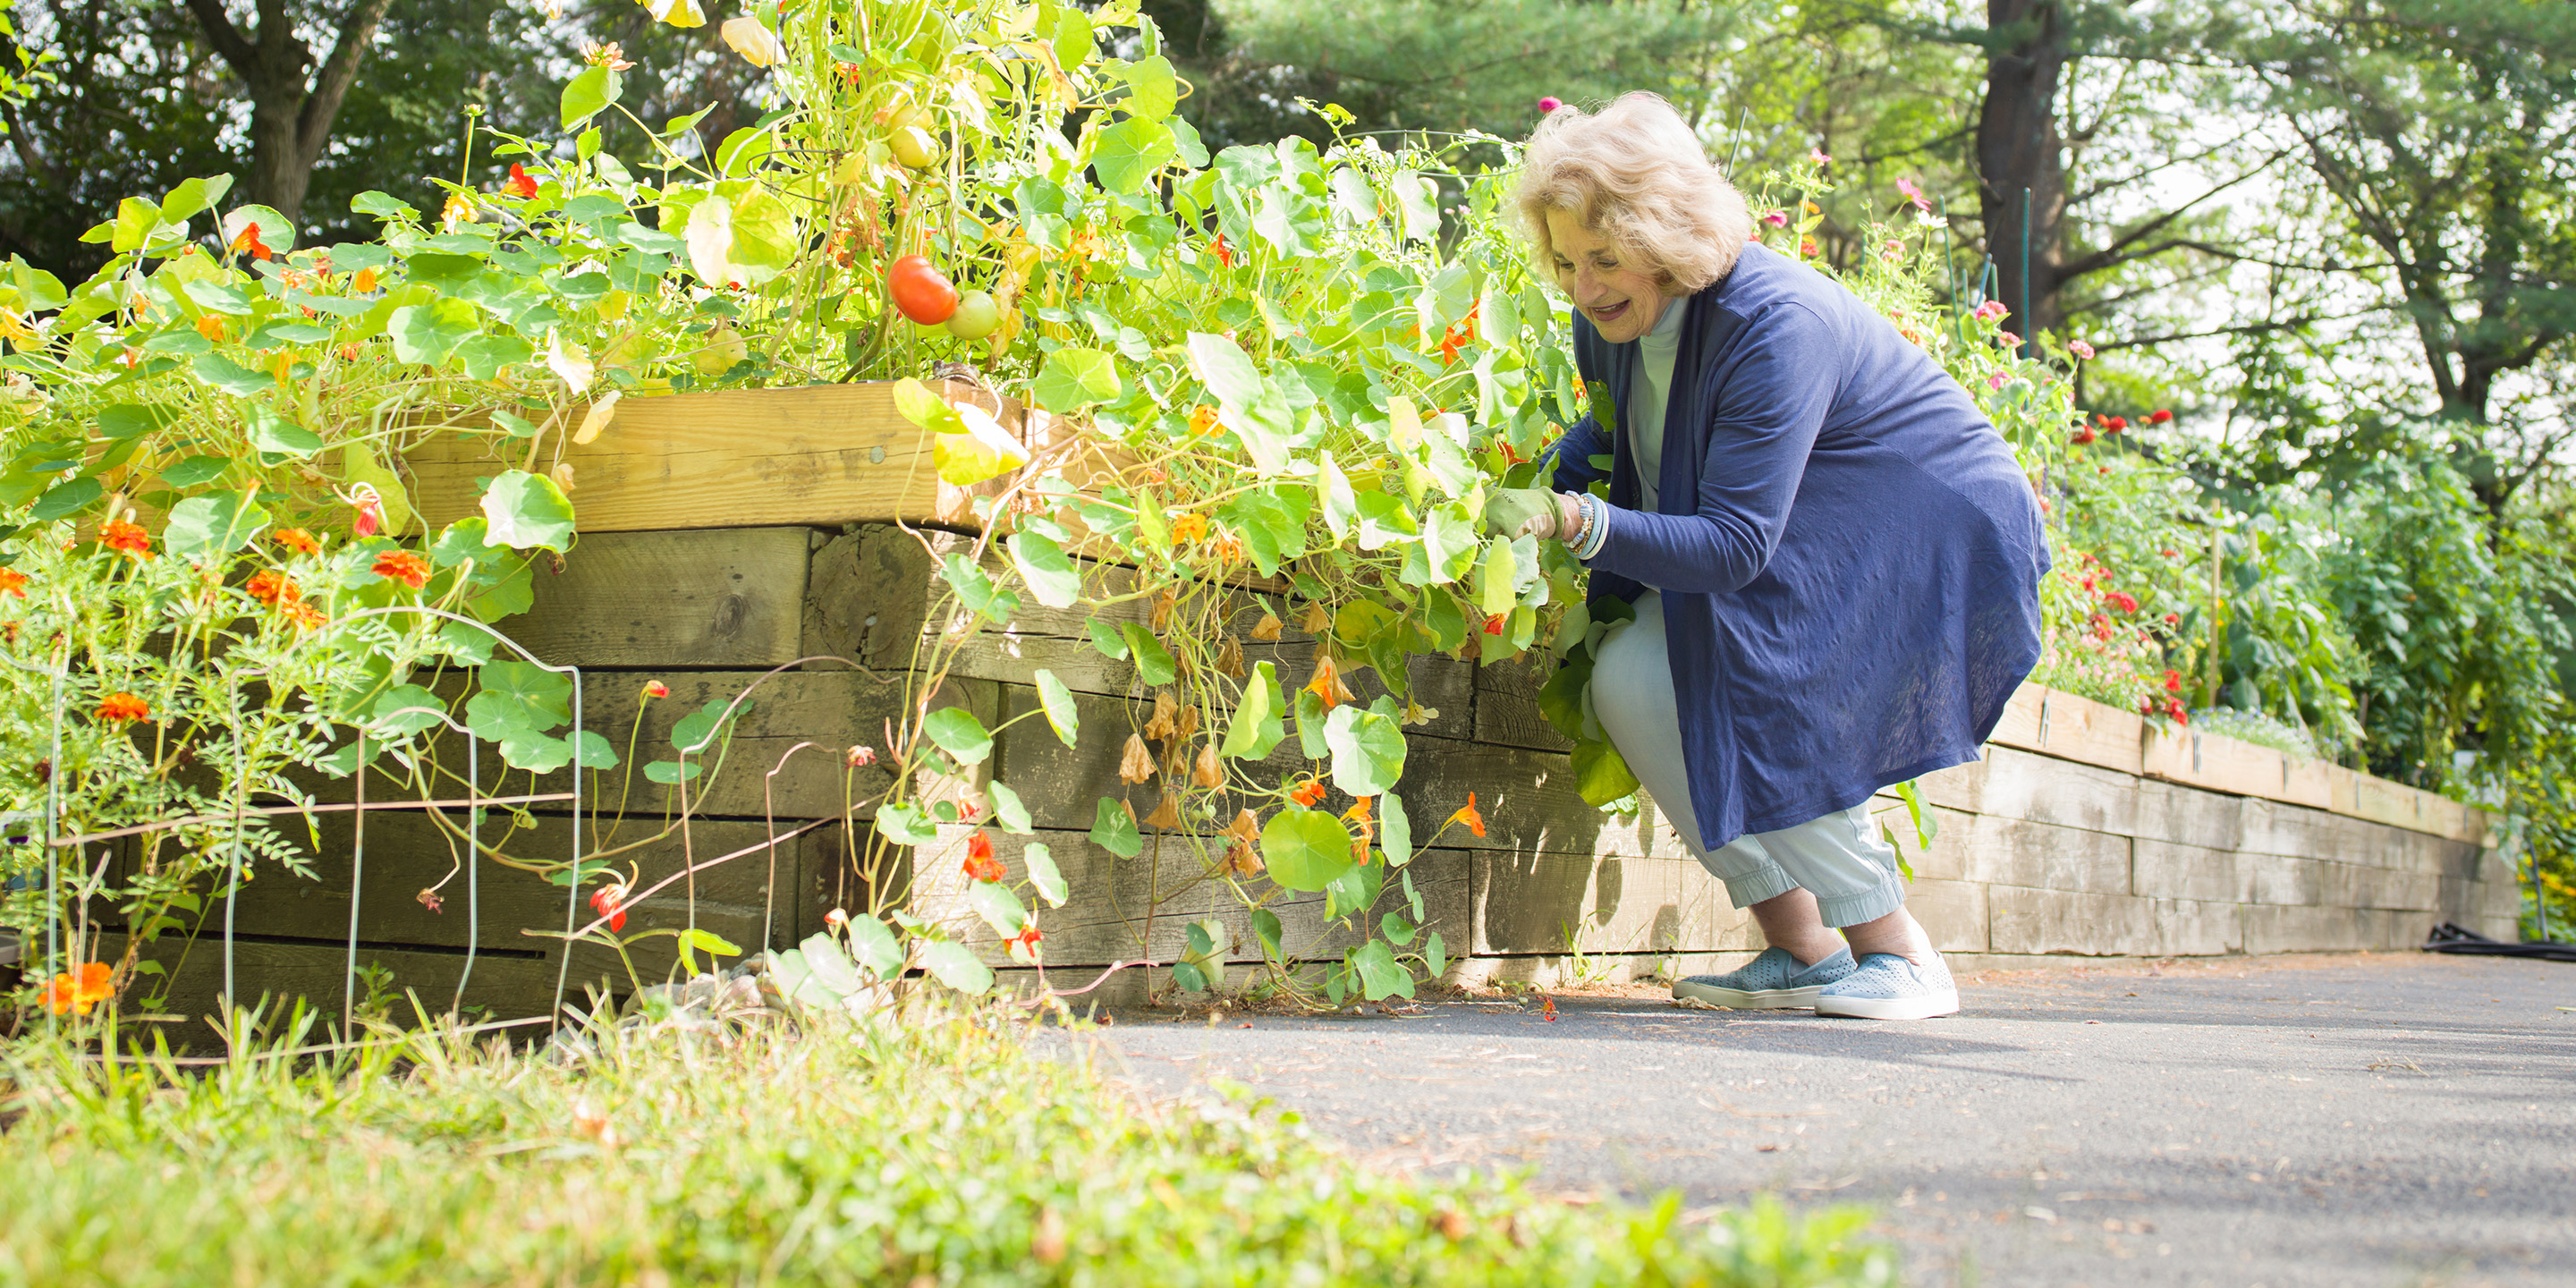 An female Orchard Cove resident tends to some plants in a garden